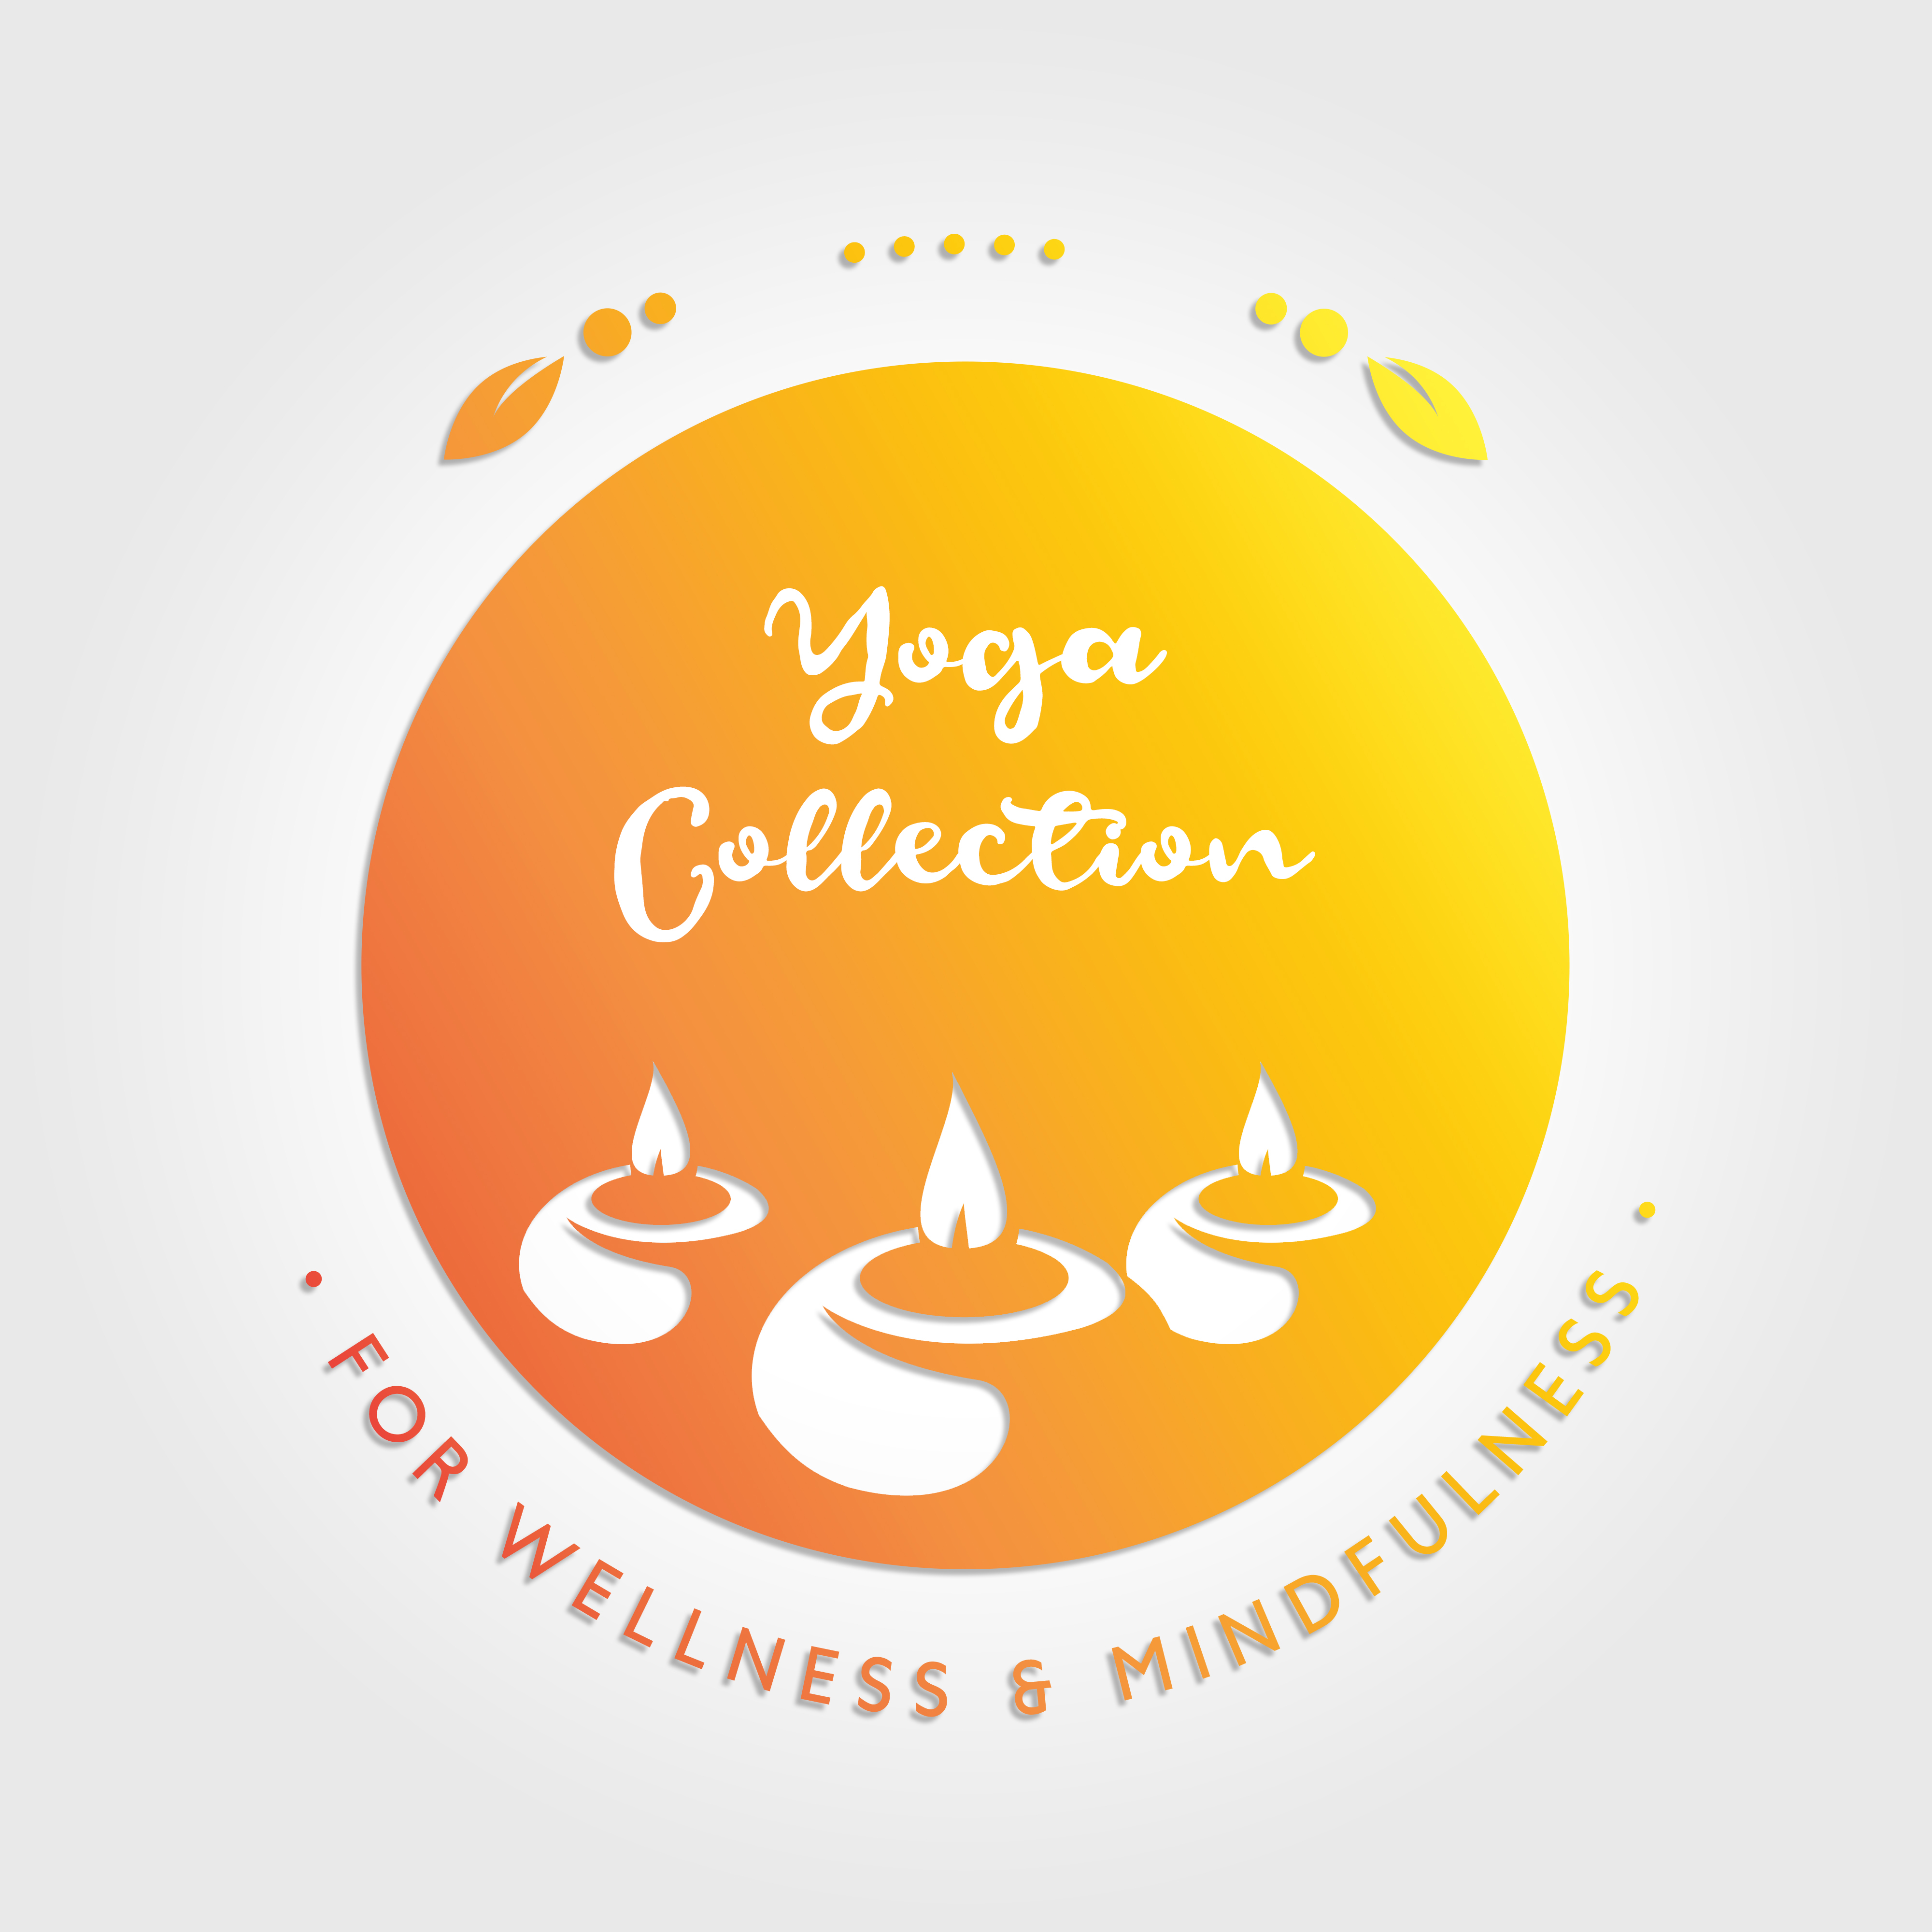 Yoga Collection for Wellness & Mindfulness